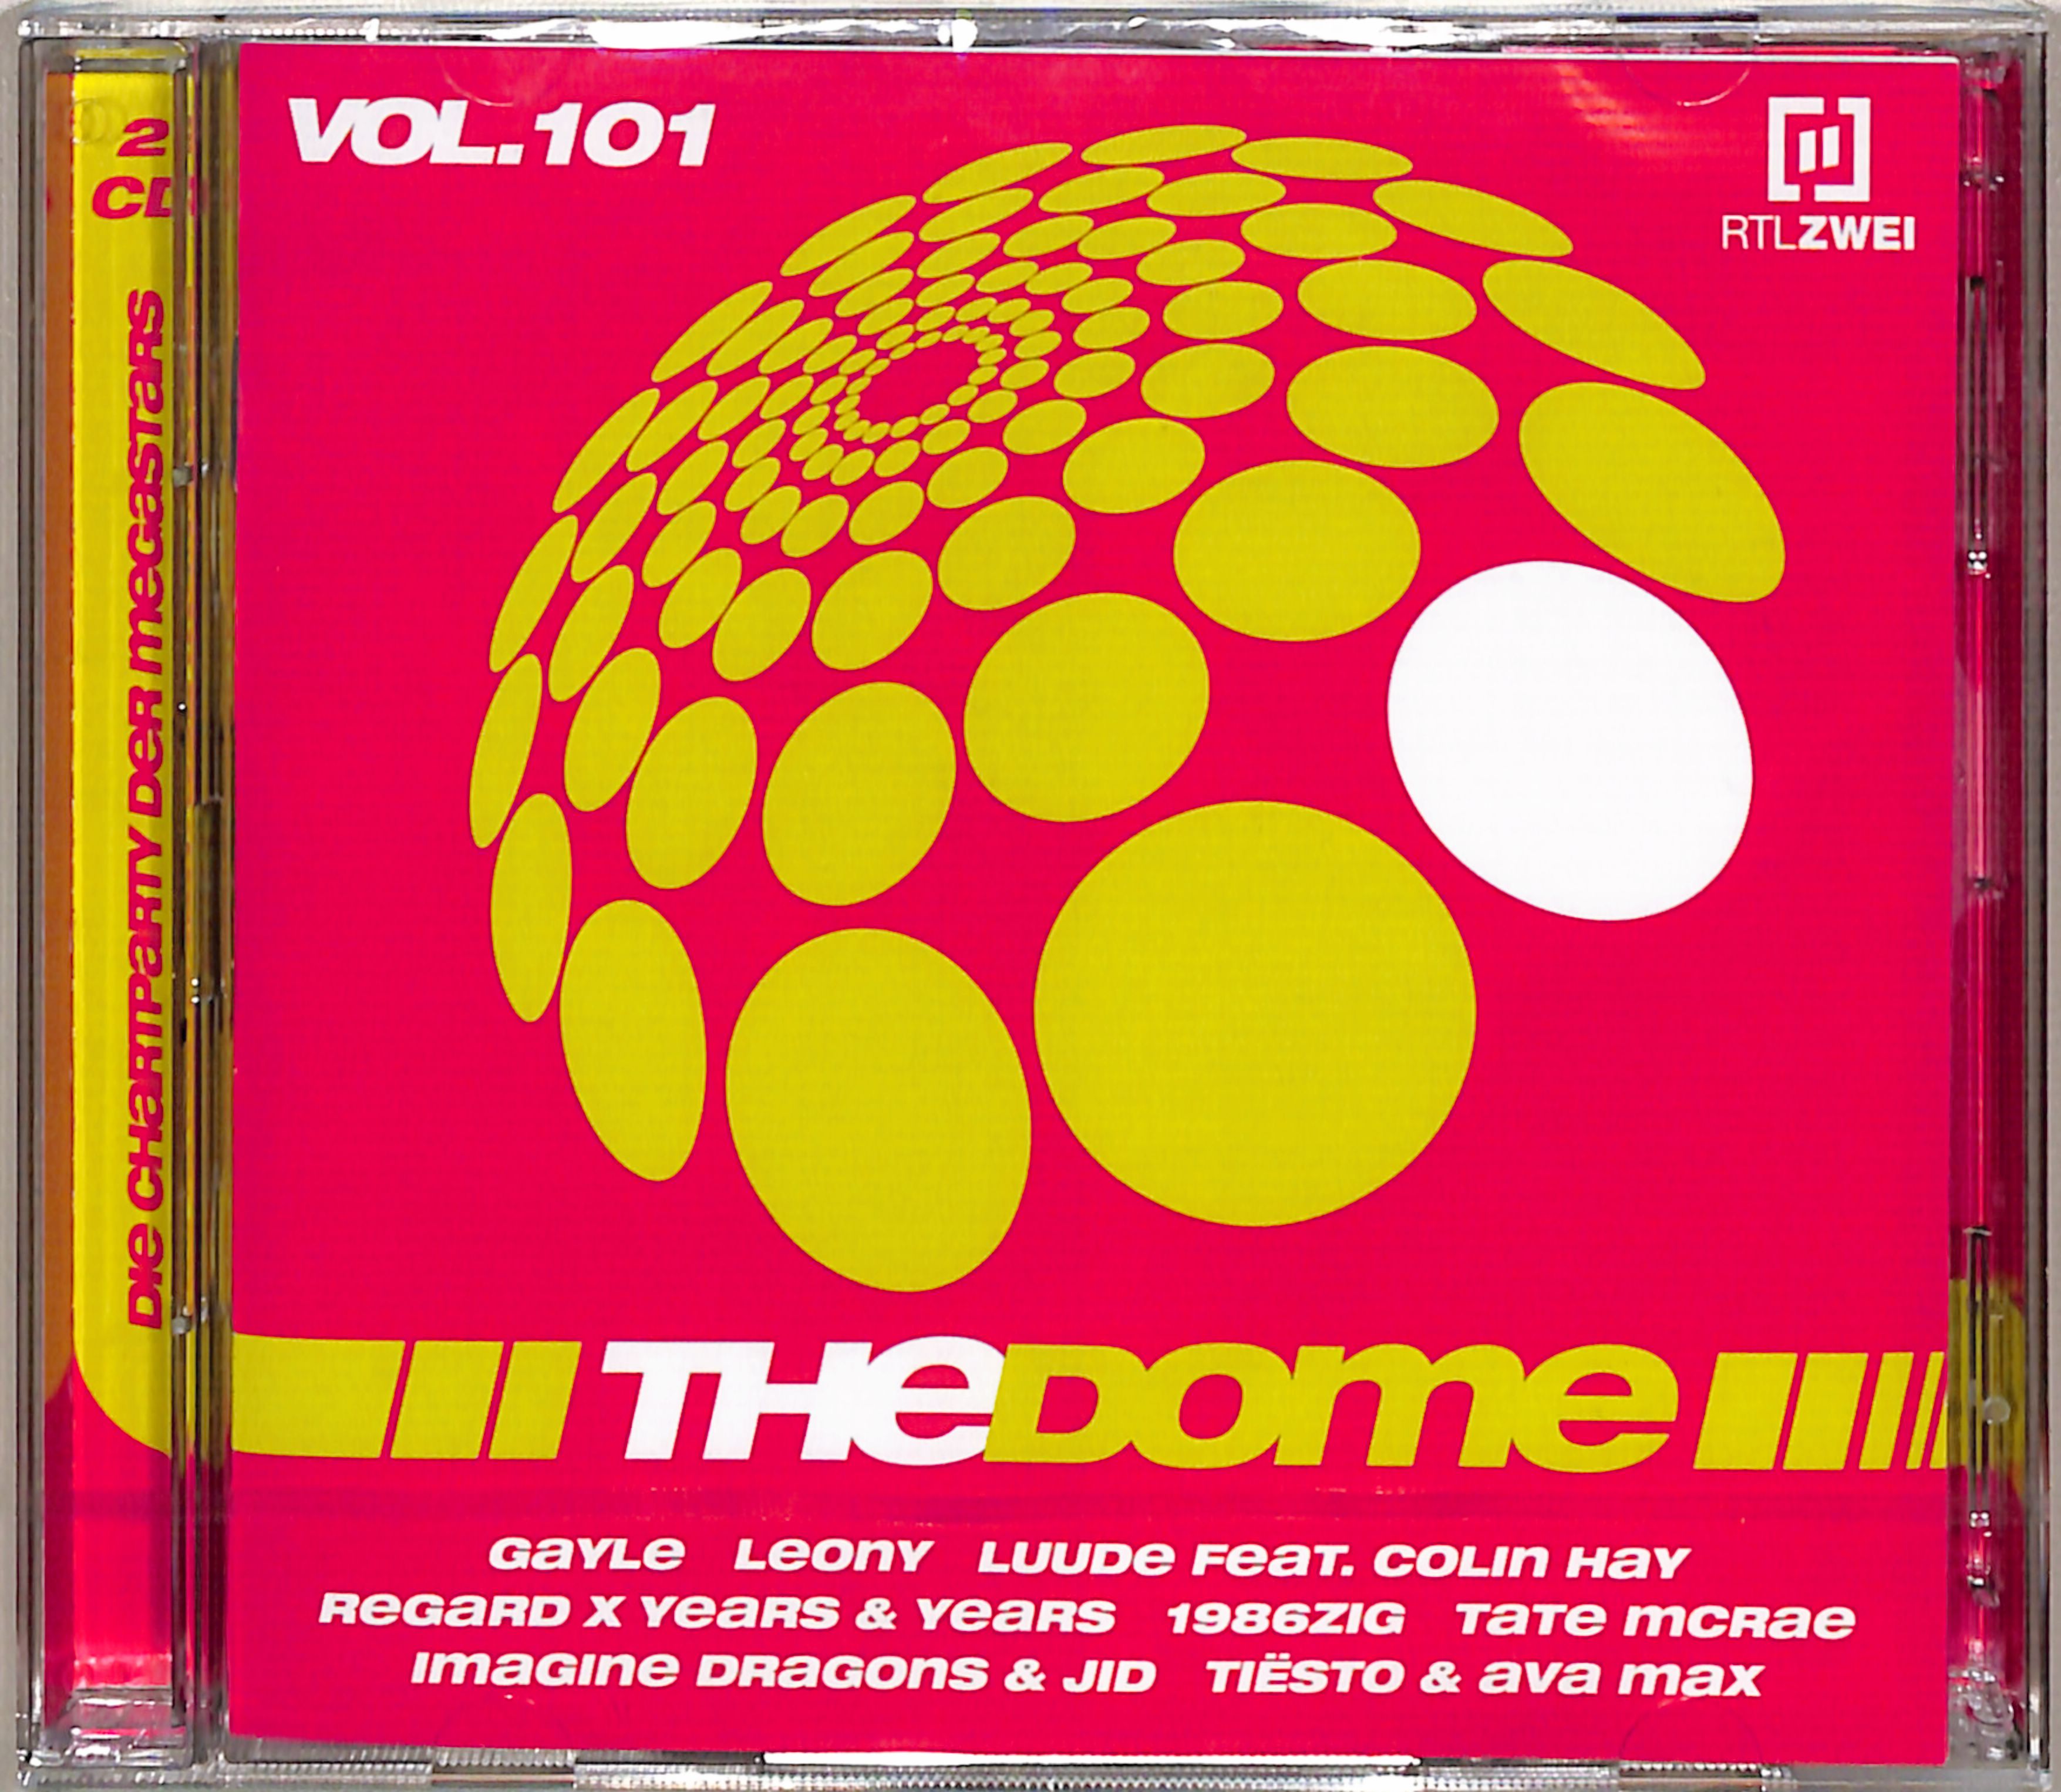 Compilations collection. Luude - down under (feat. Colin hay). The Dome cdr. Песни 2022 названия. The Dome Effect.